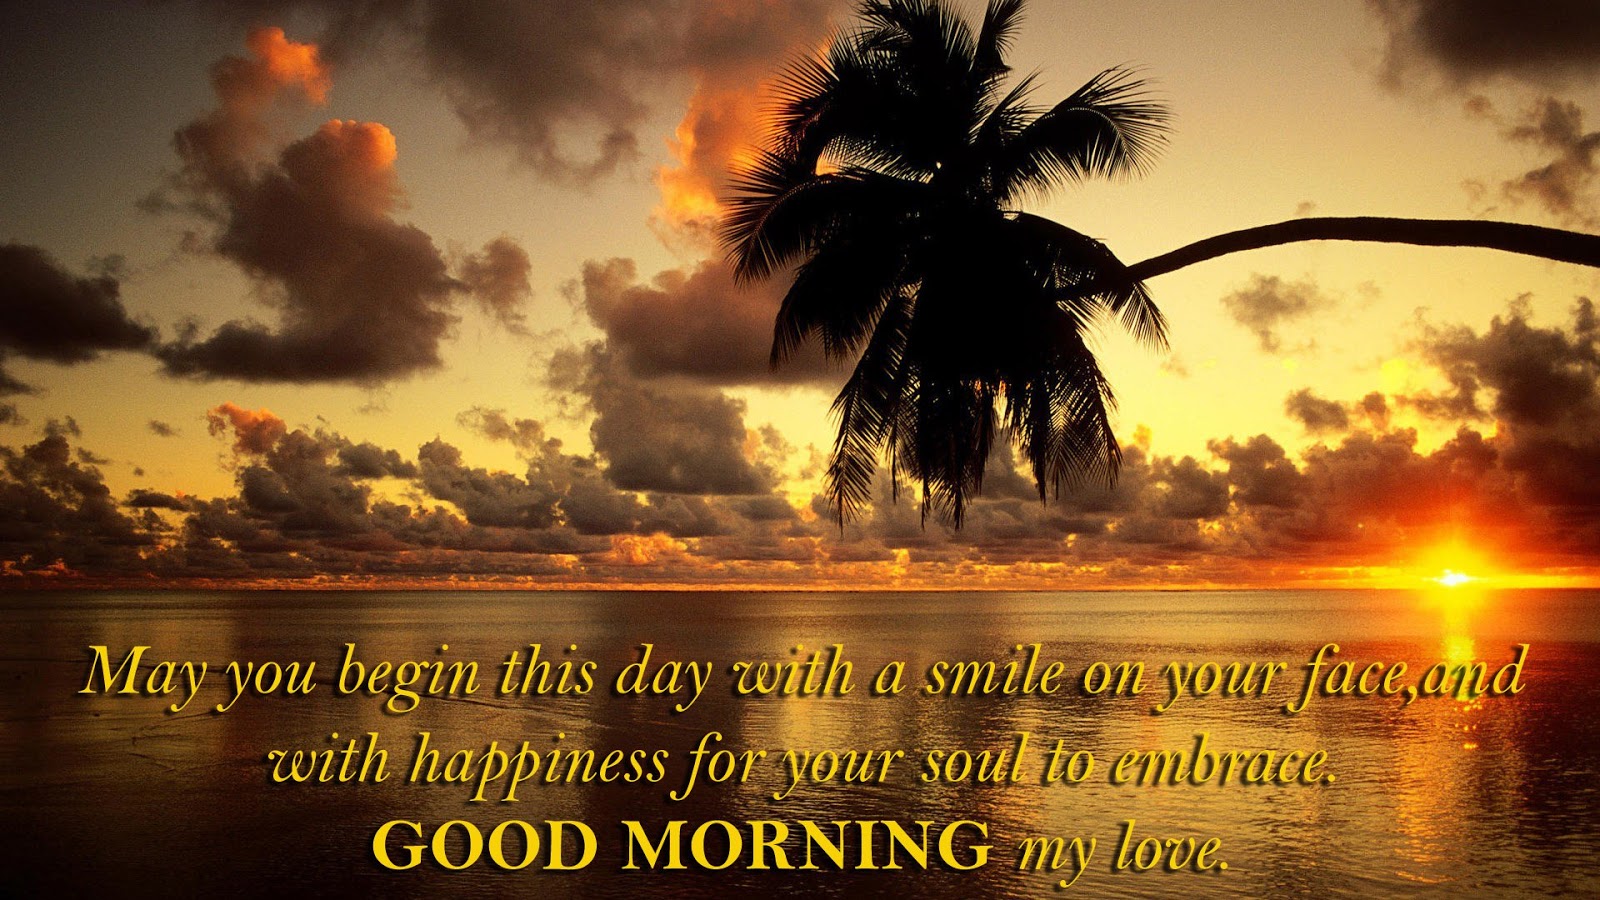 may you begin this day with a smile on your face